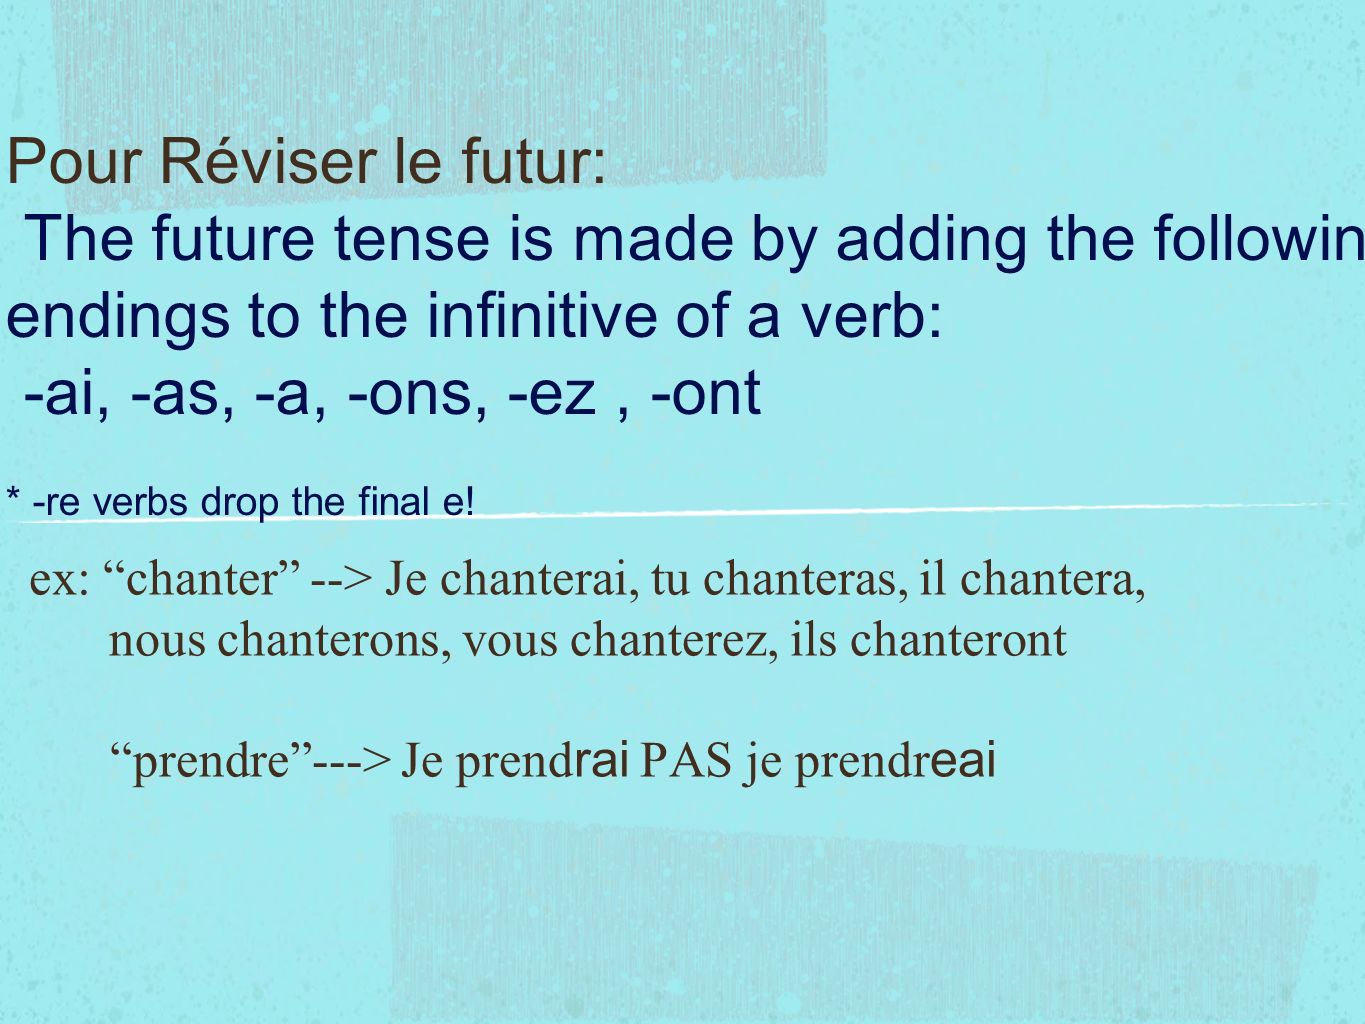 Pour Réviser le futur: The future tense is made by adding the following endings to the infinitive of a verb: -ai, -as, -a, -ons, -ez, -ont * -re verbs drop the final e.